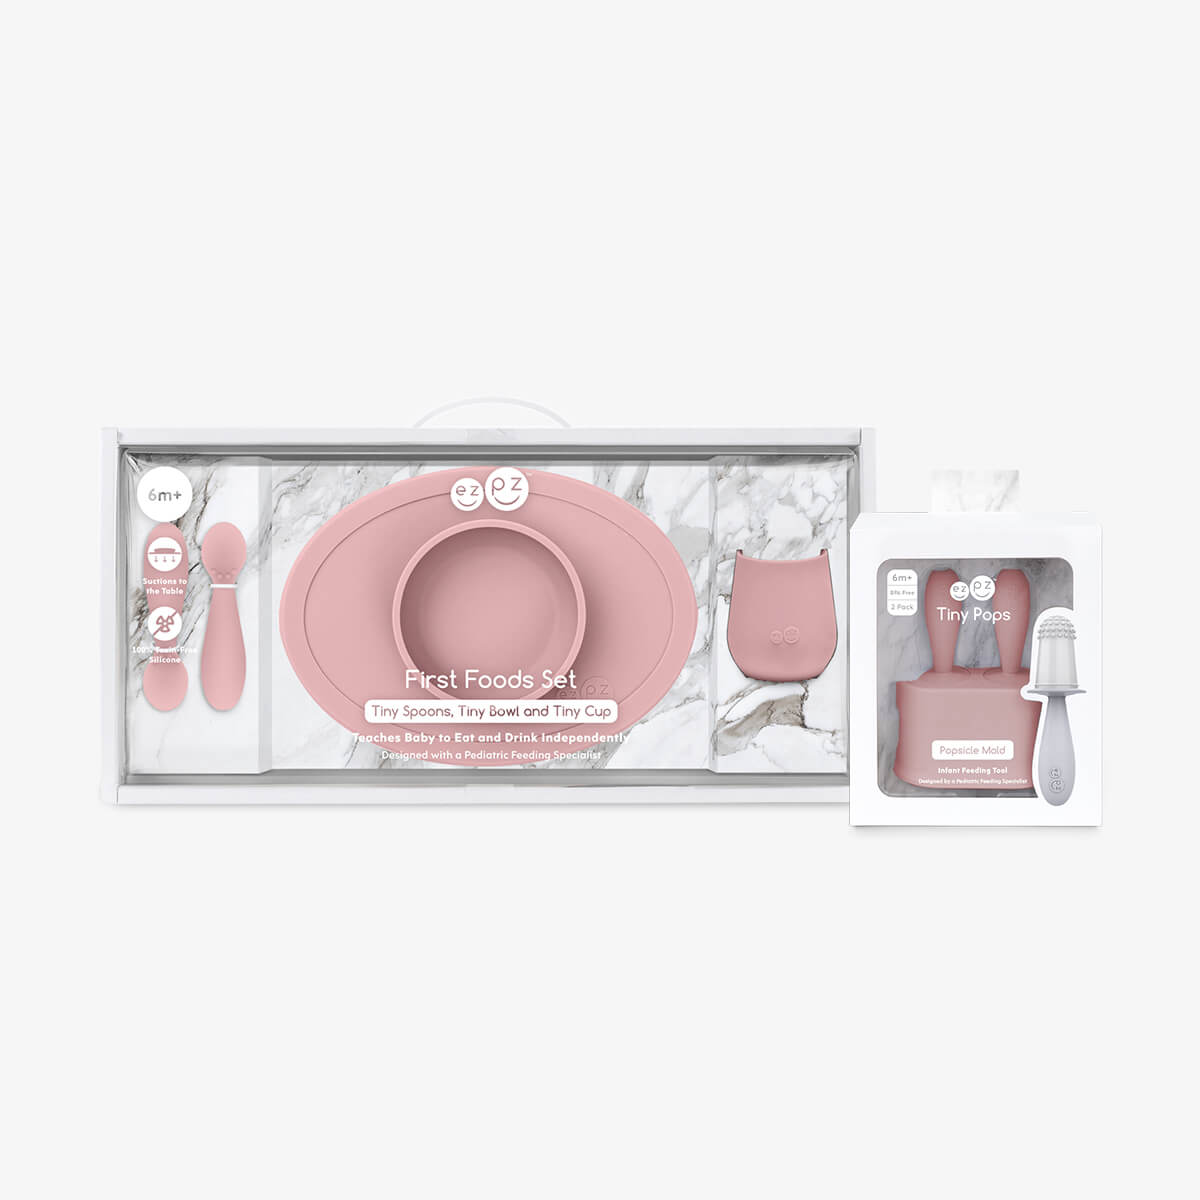 First Bites & Cool Treats Bundle in Blush Pink / ezpz First Foods Set and Tiny Pops